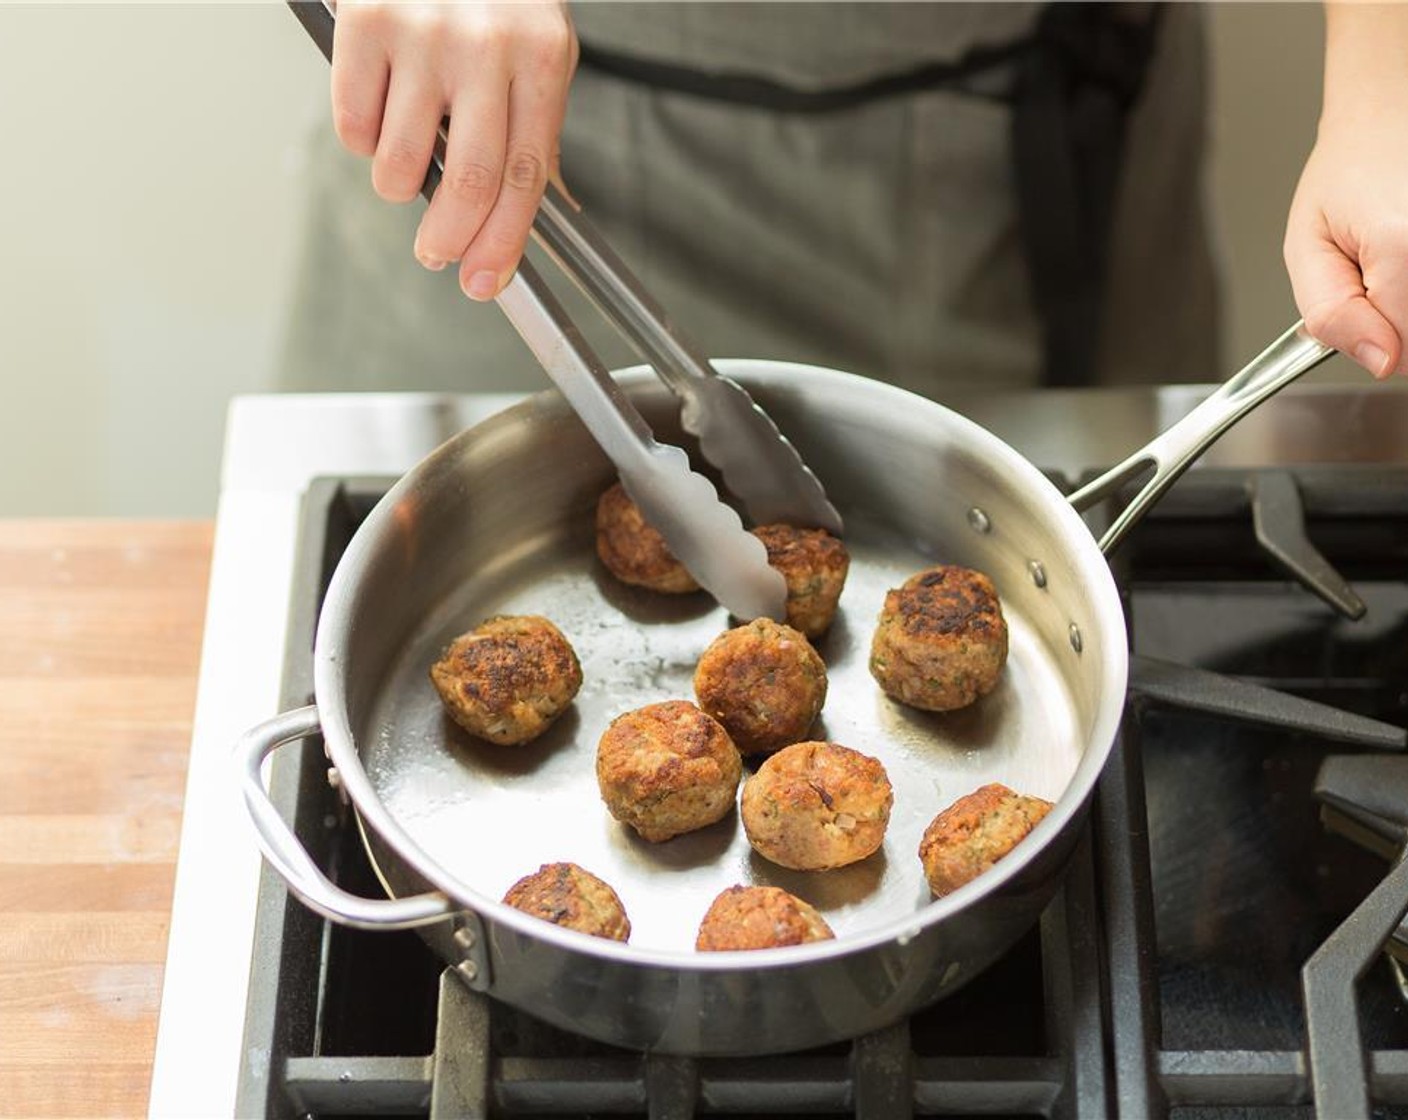 step 5 Heat a large deep saute pan over medium high heat and add Olive Oil (1 Tbsp). Once hot, carefully add the meatballs and brown on all sides. Transfer meatballs to a plate but do not remove pan from heat.